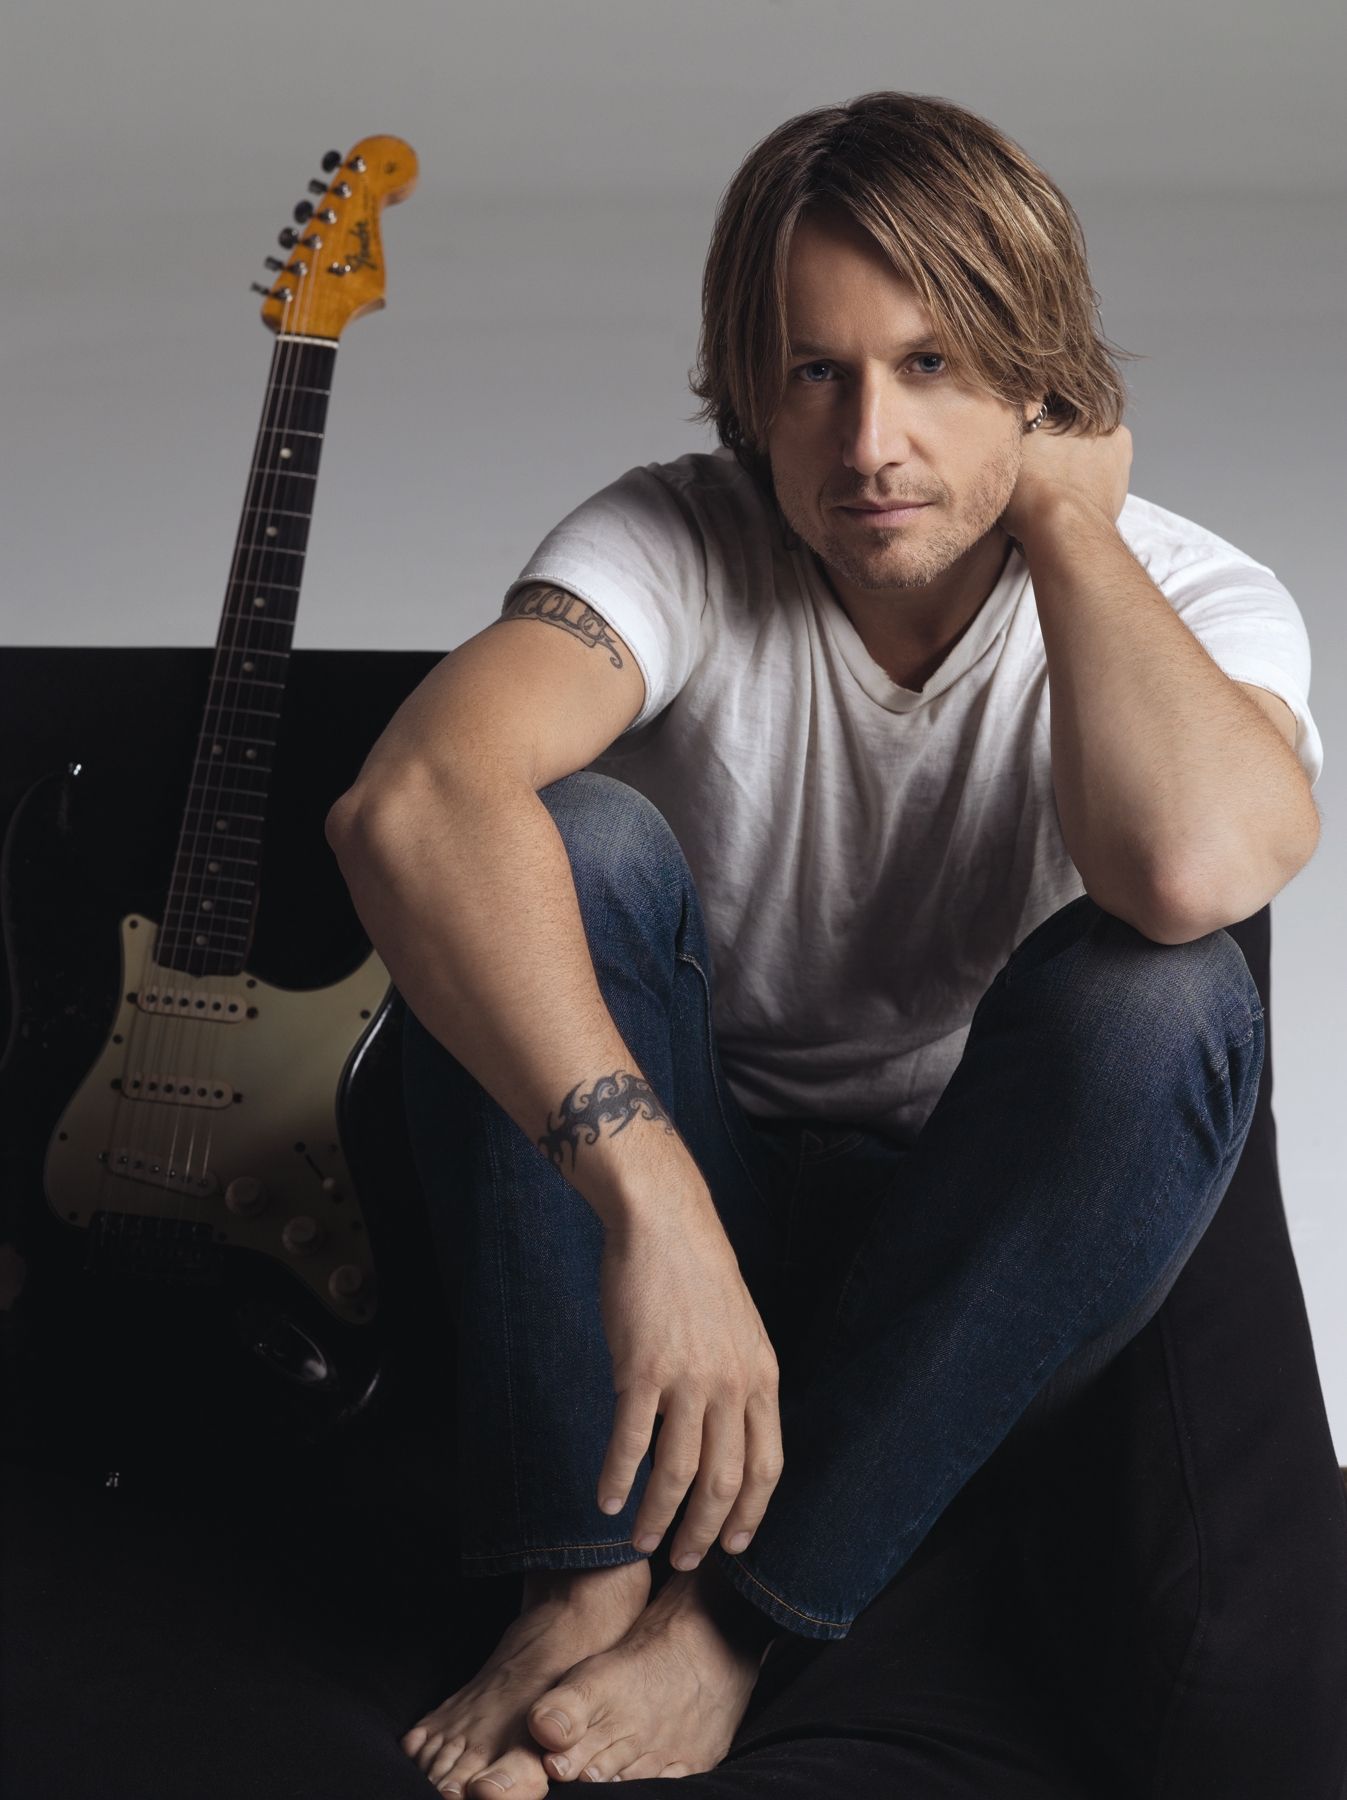 KEITH URBAN GET CLOSER ” Working The Core” Cd Review By John Emms. JOHN EMMS MUSIC REVIEWS